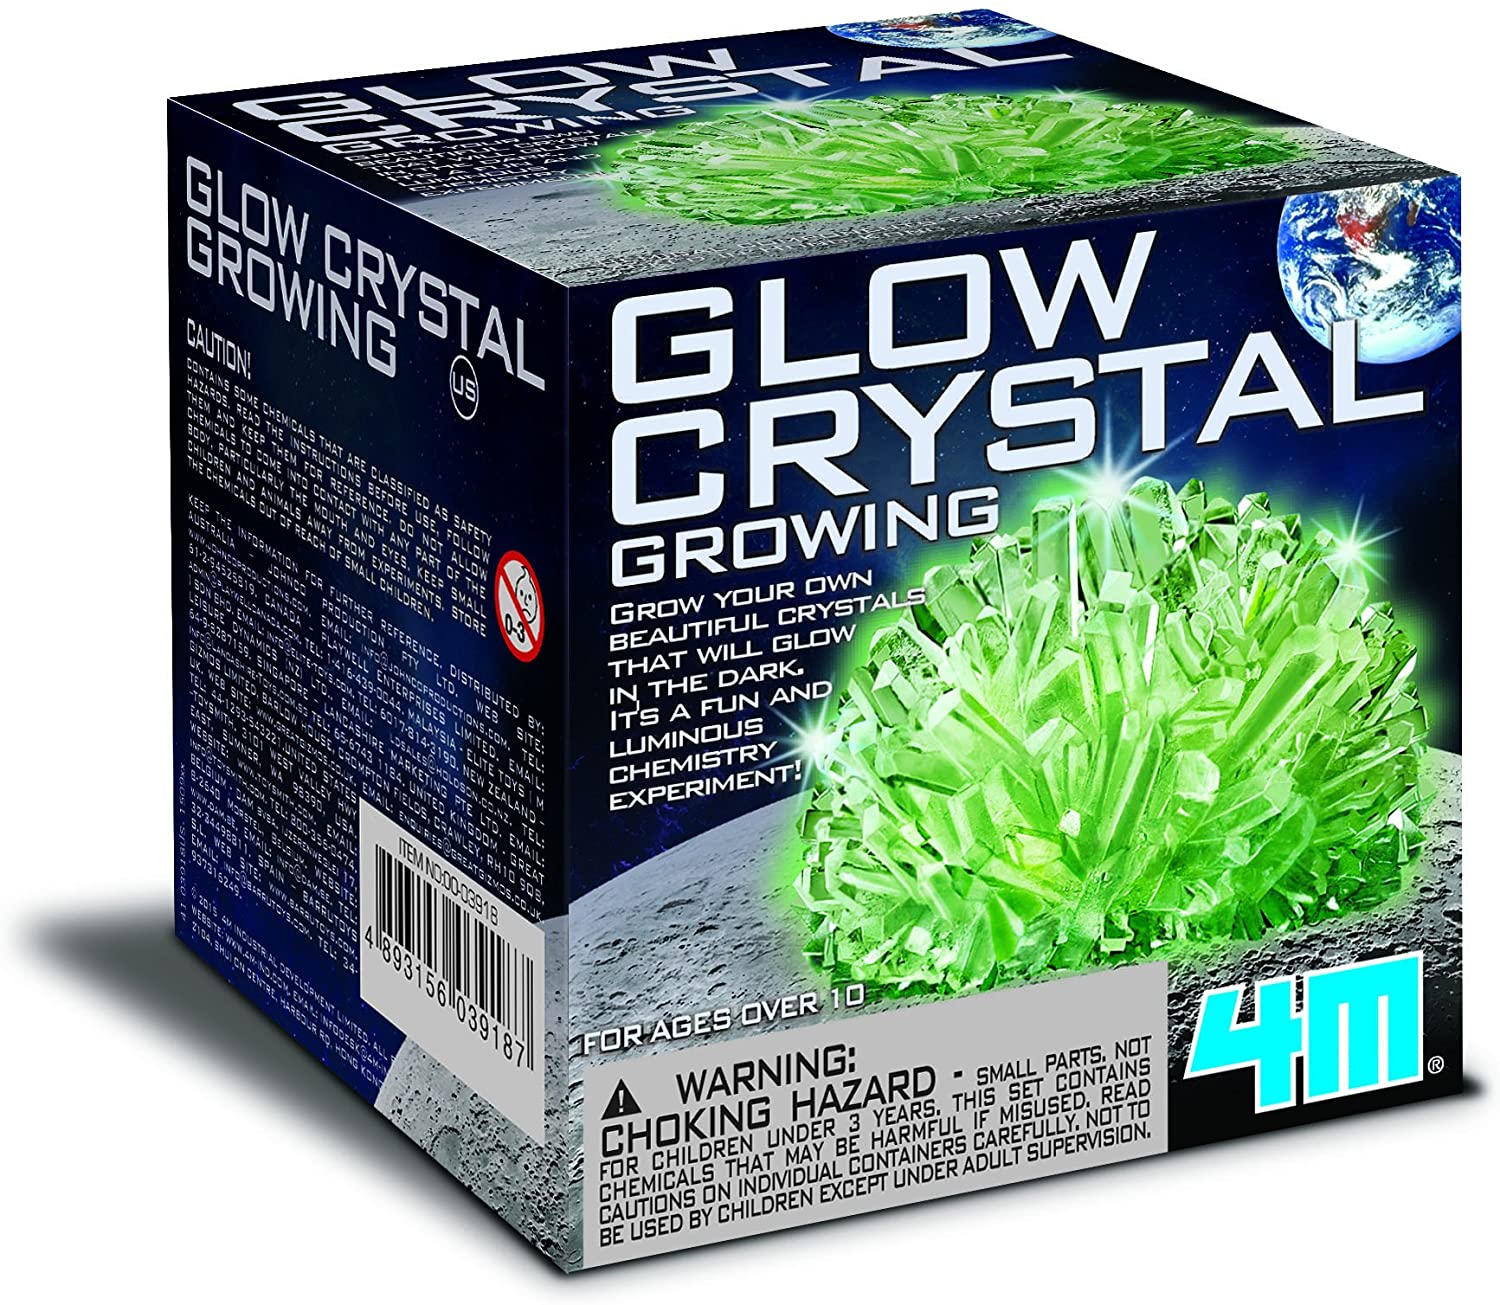 DISCOVER WITH DR COOL Glow-in-the-Dark Crystal Growing Educational Science Kit 